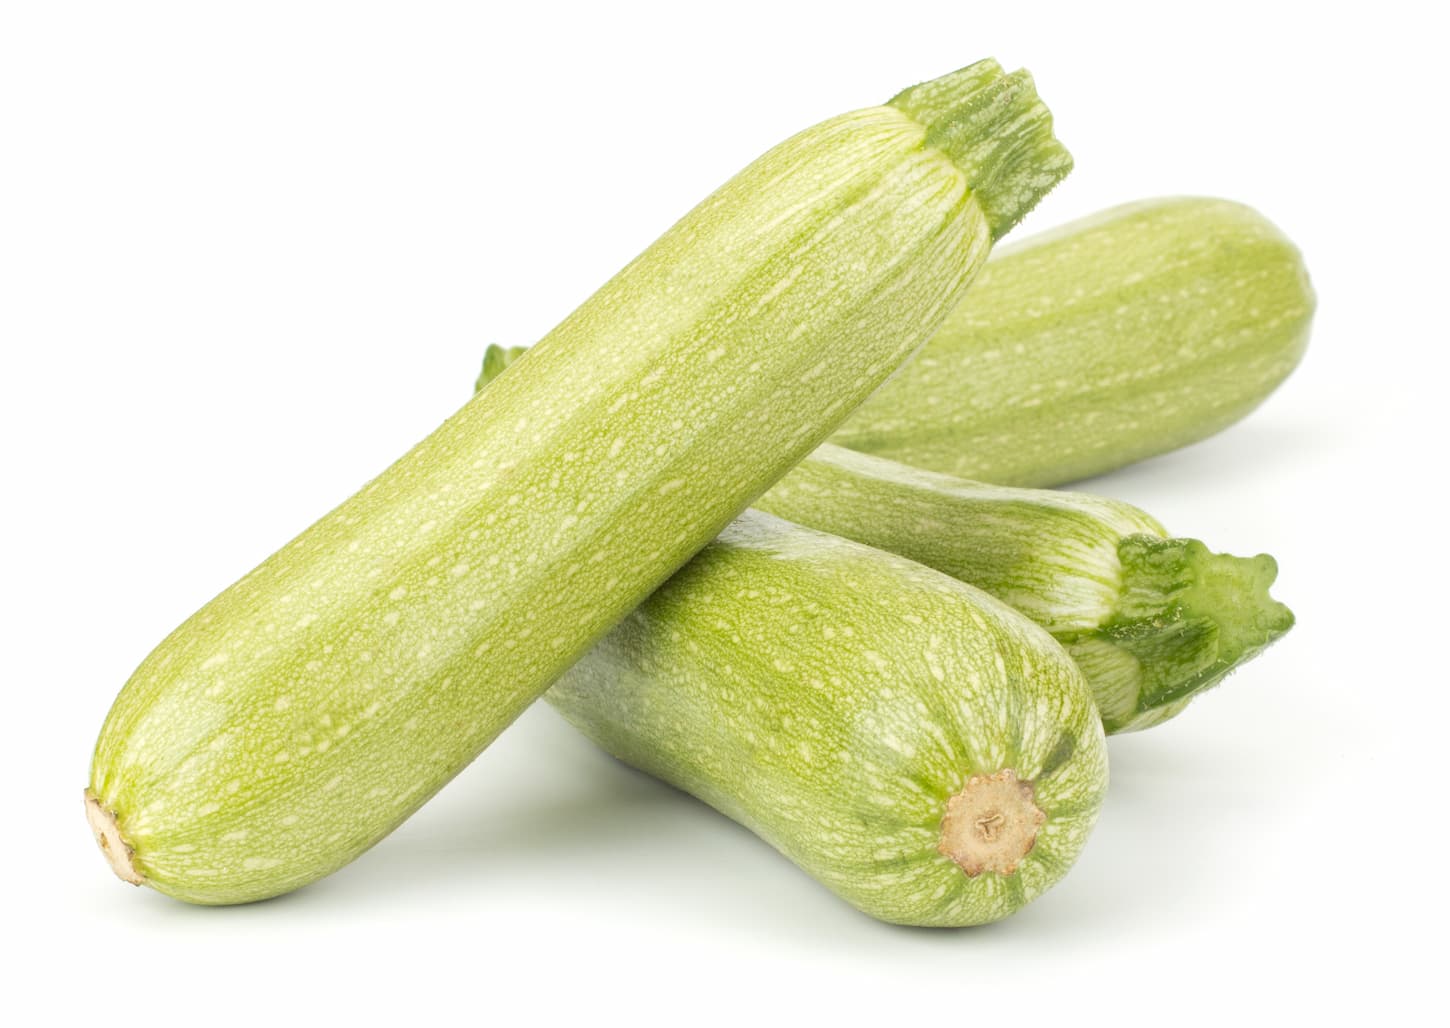 Can You Eat Zucchini With Blossom End Rot?